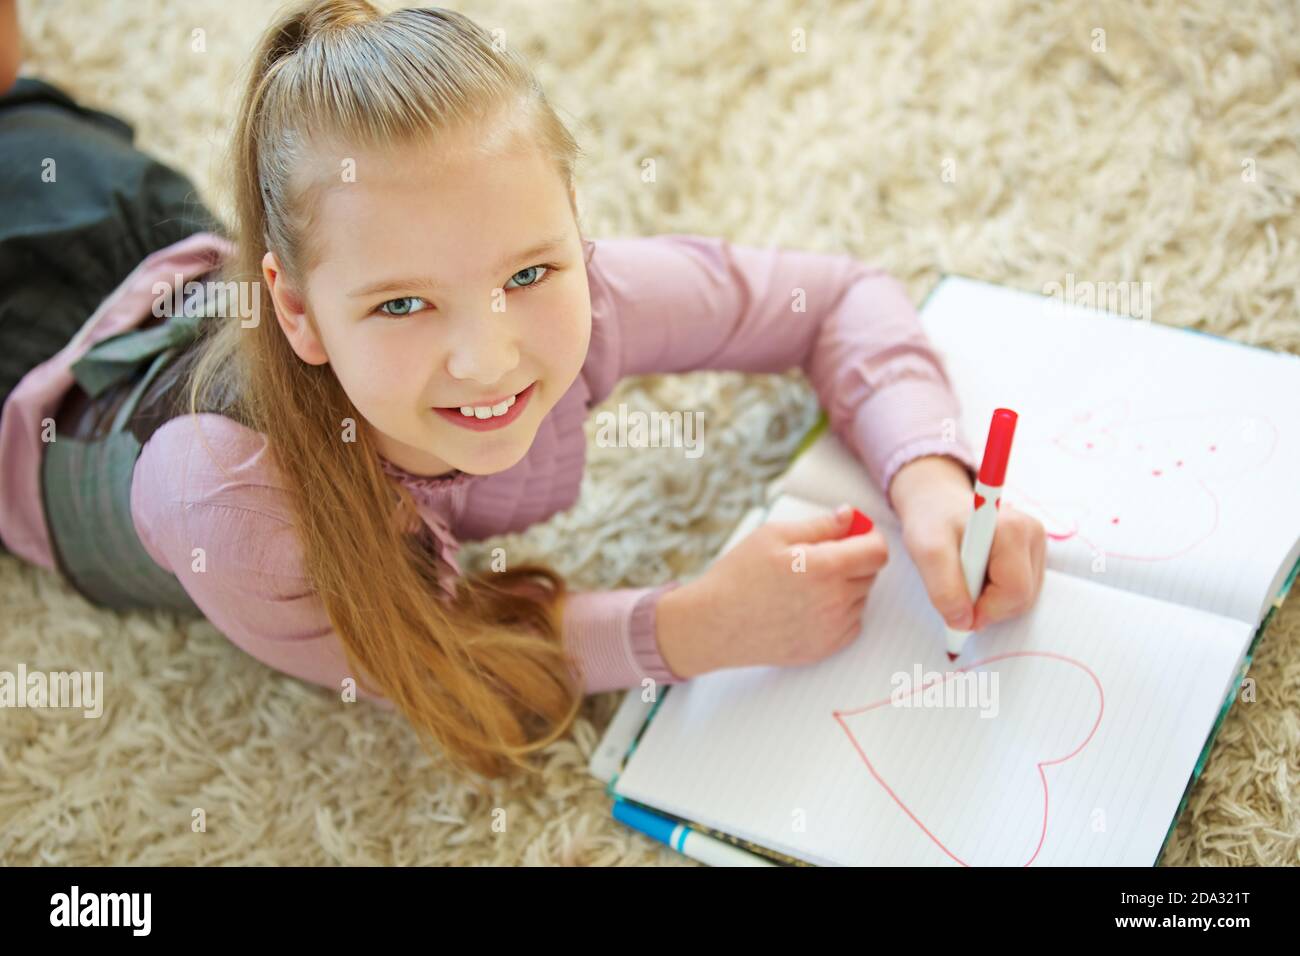 Girl paints a big red heart in her exercise book Stock Photo